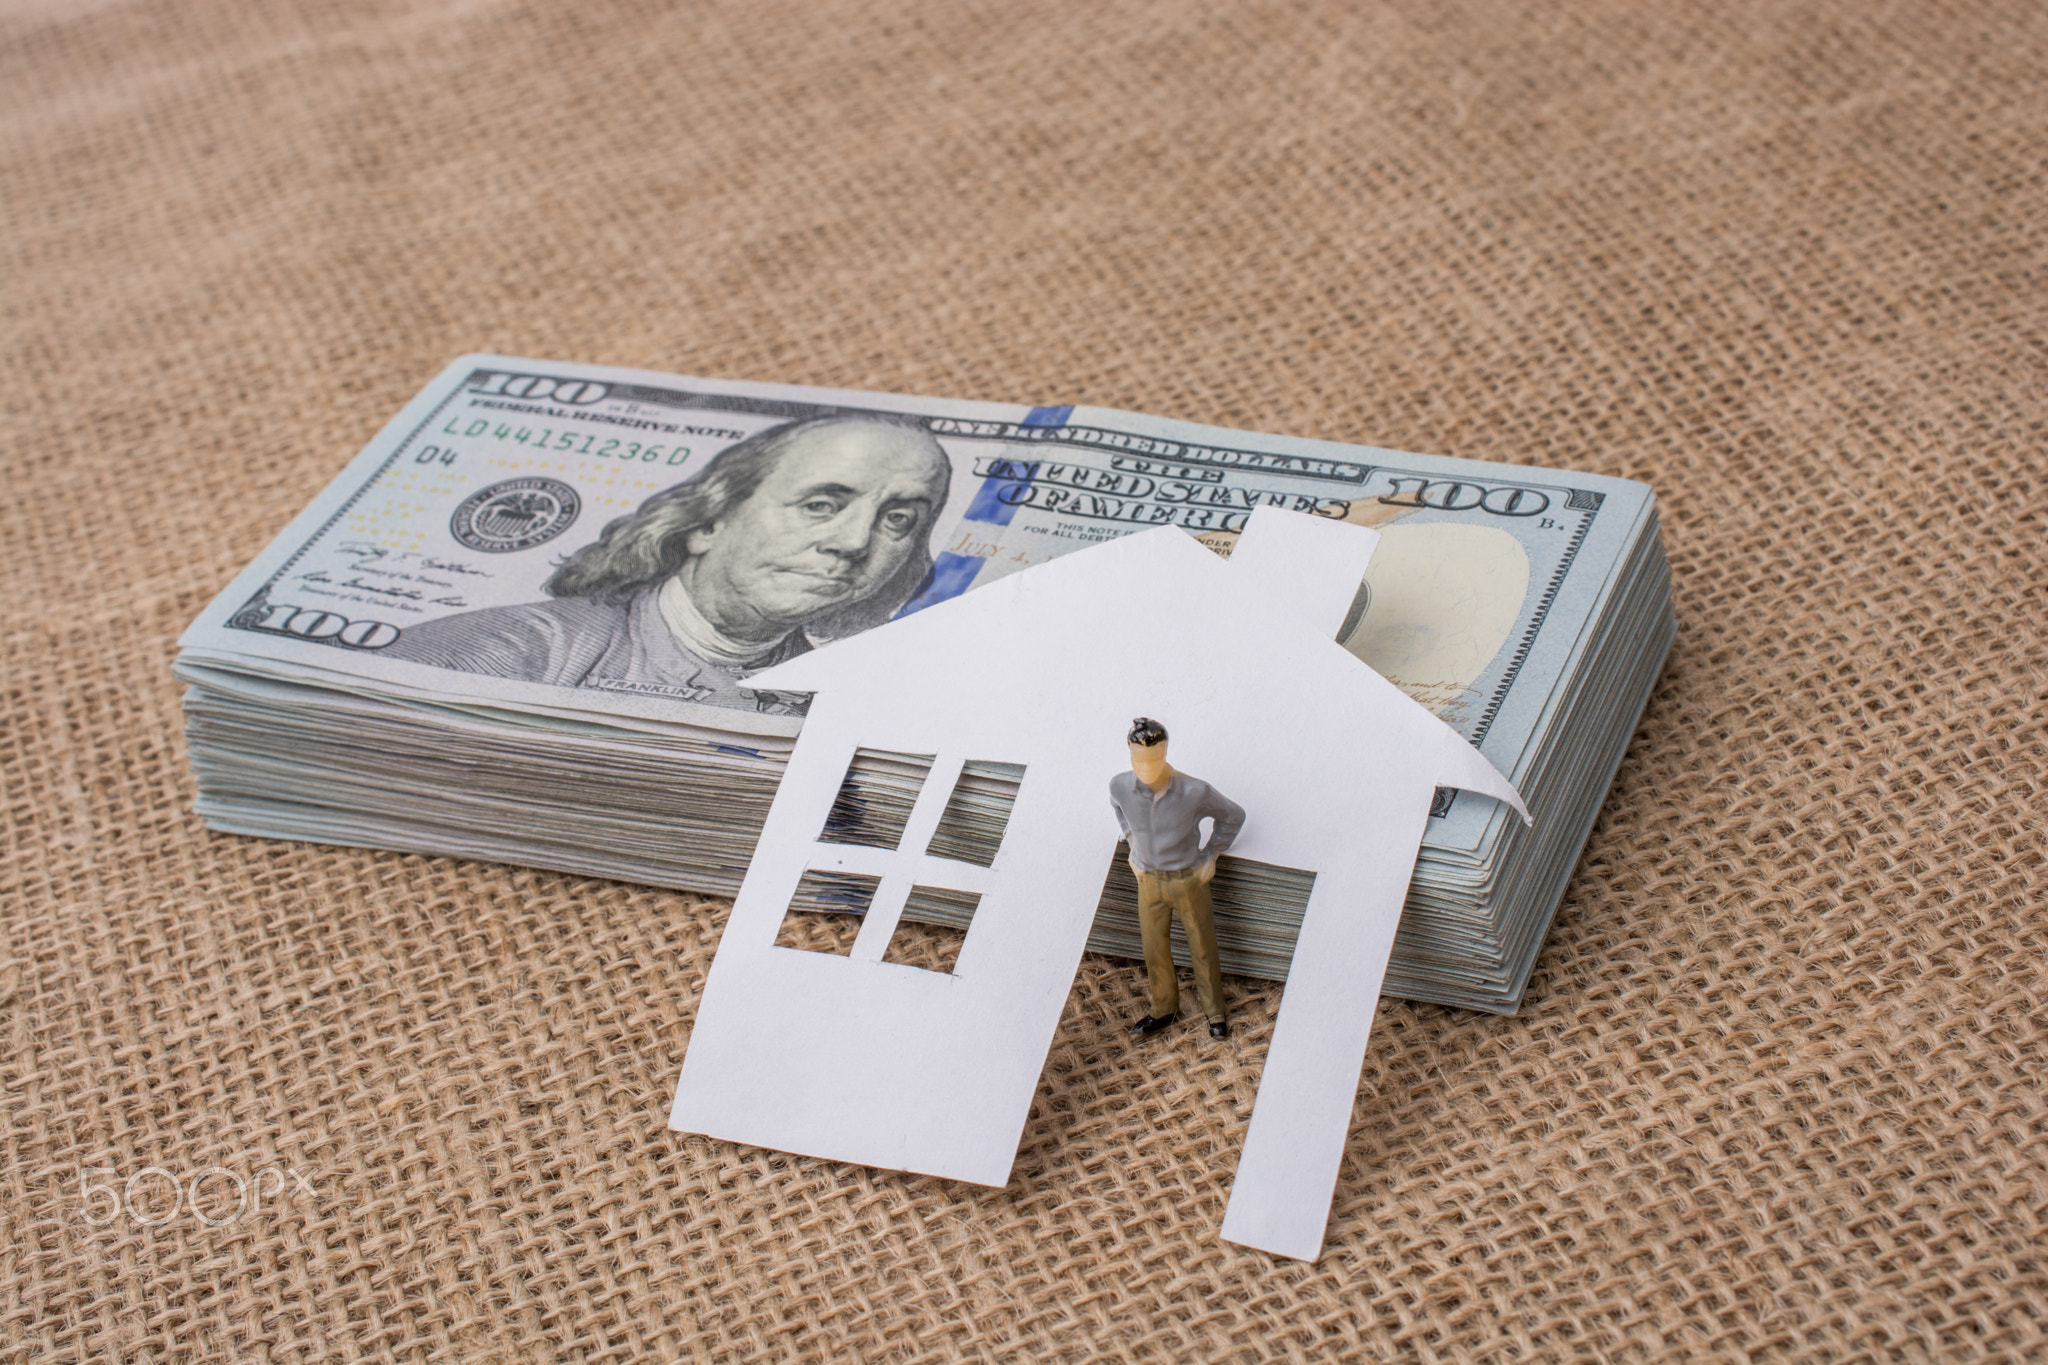 Paper house and a man figurine beside US dollar banknote